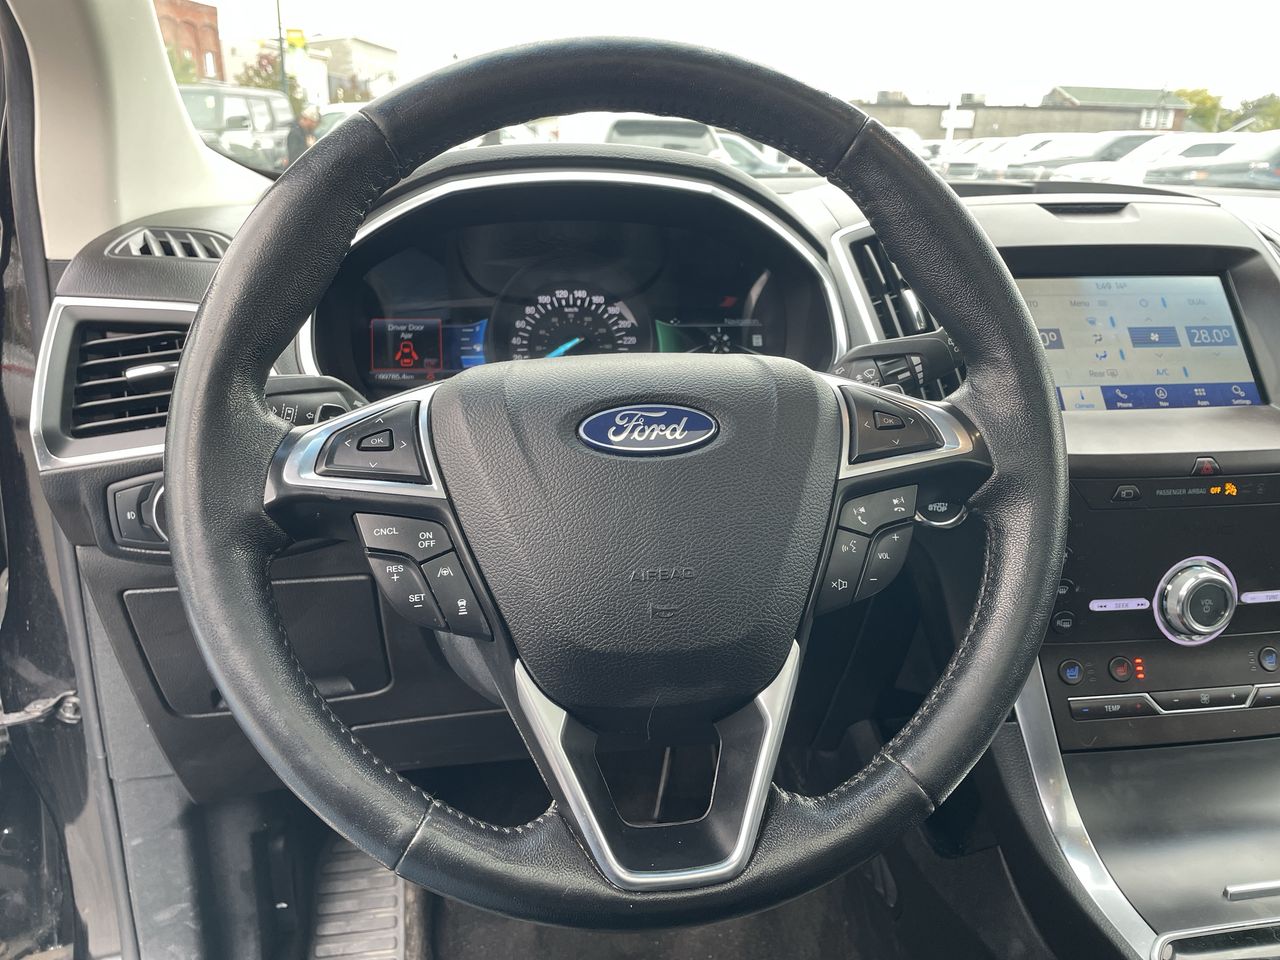 2020 Ford Edge - P21357A Full Image 14